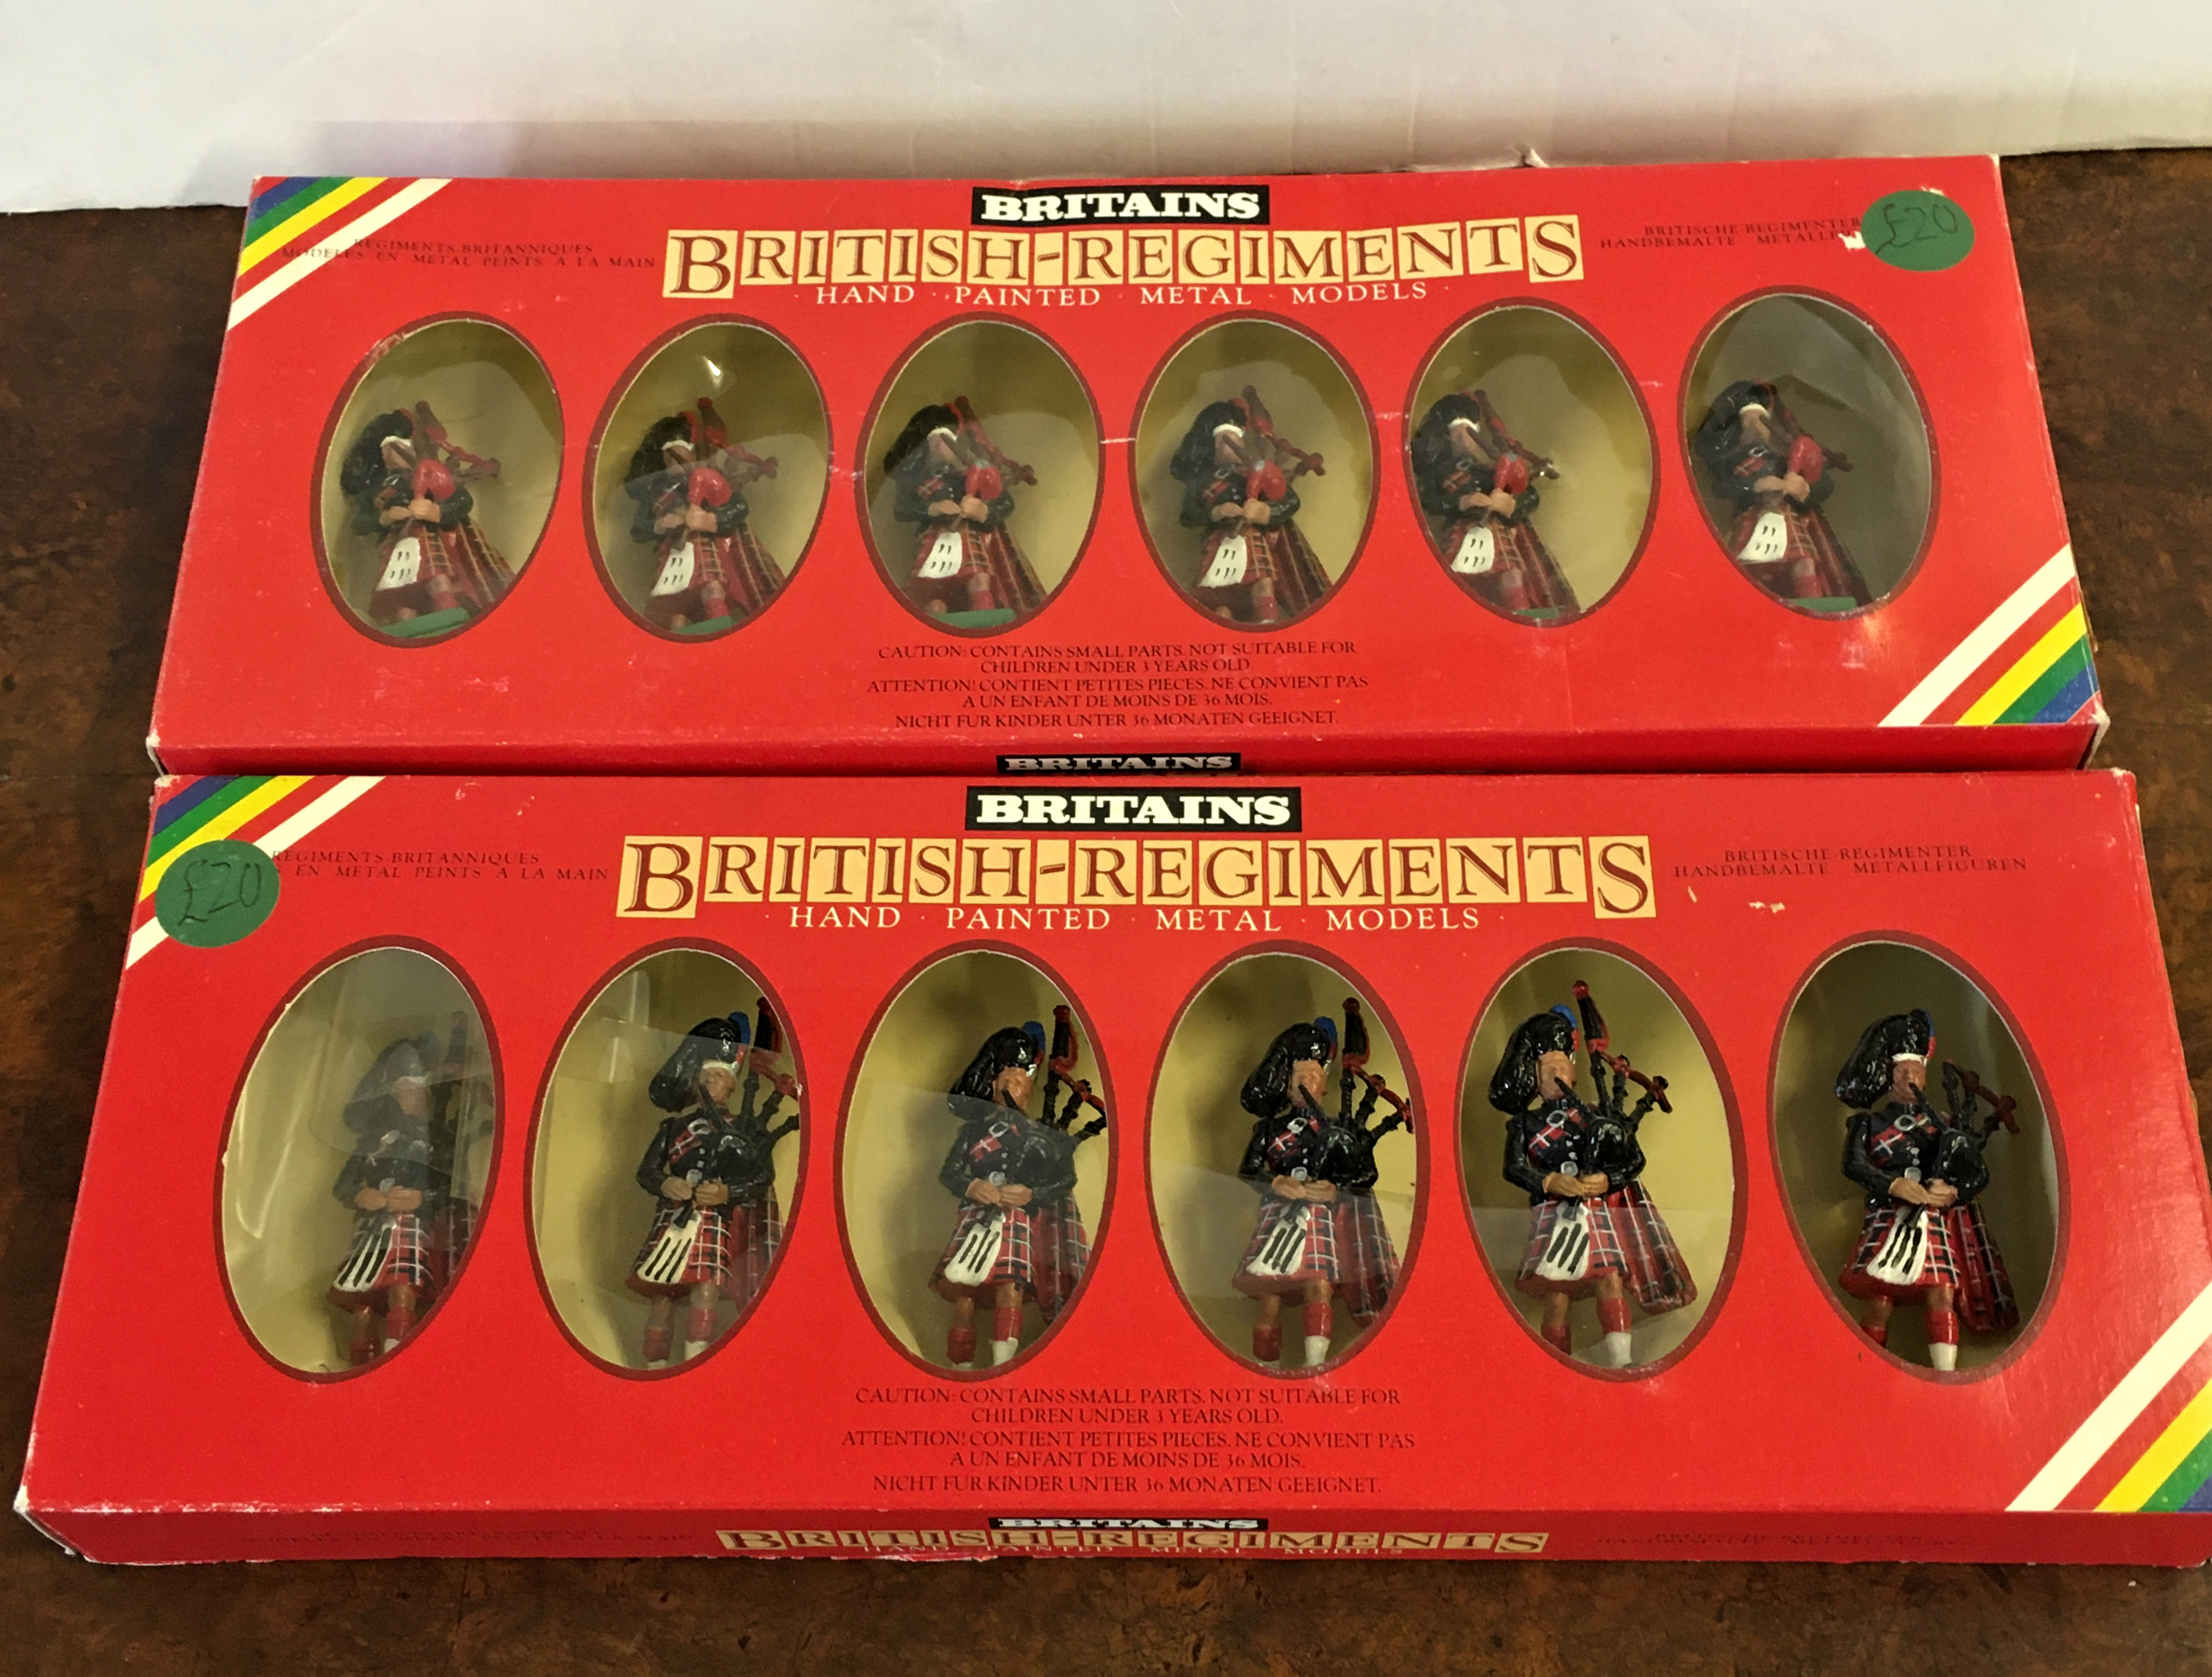 Two boxed Britains lead soldier sets - British-Regiments Scots Guard Pipers (7241), and six Gordon